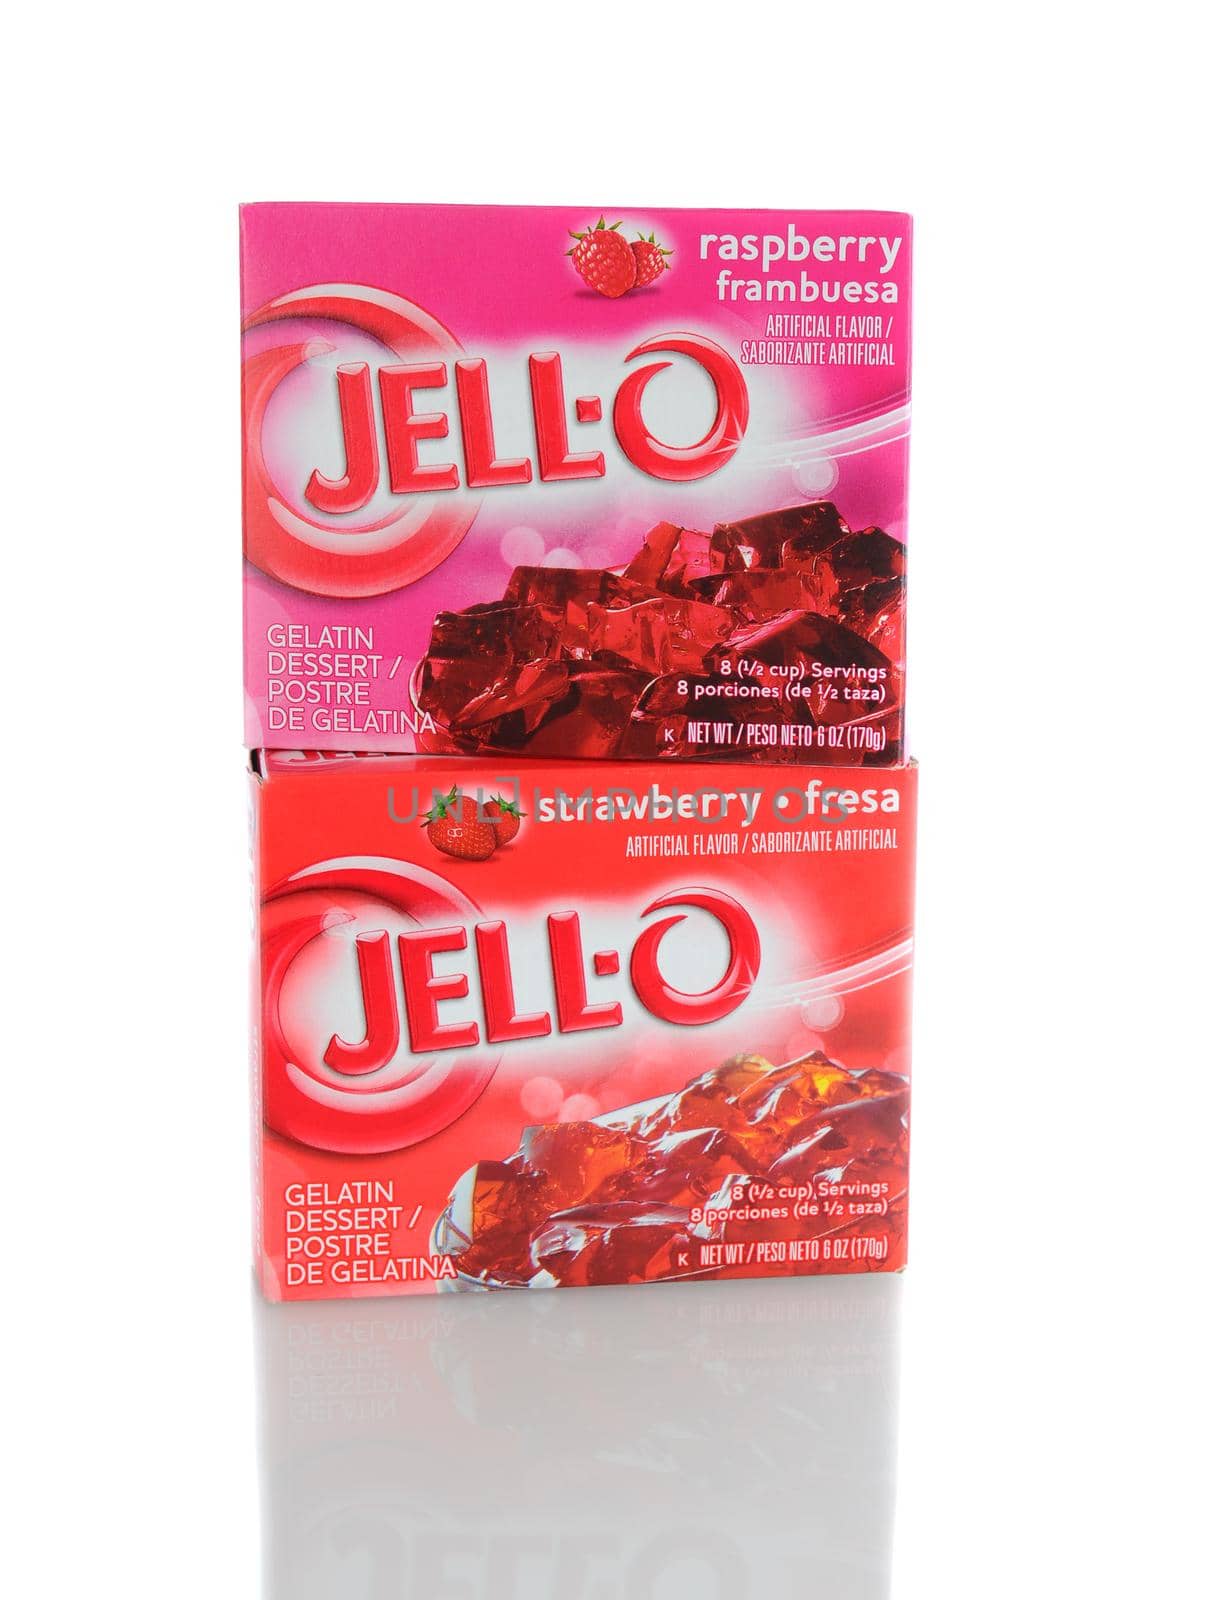 2 Boxes of Jell-O Dessert by sCukrov